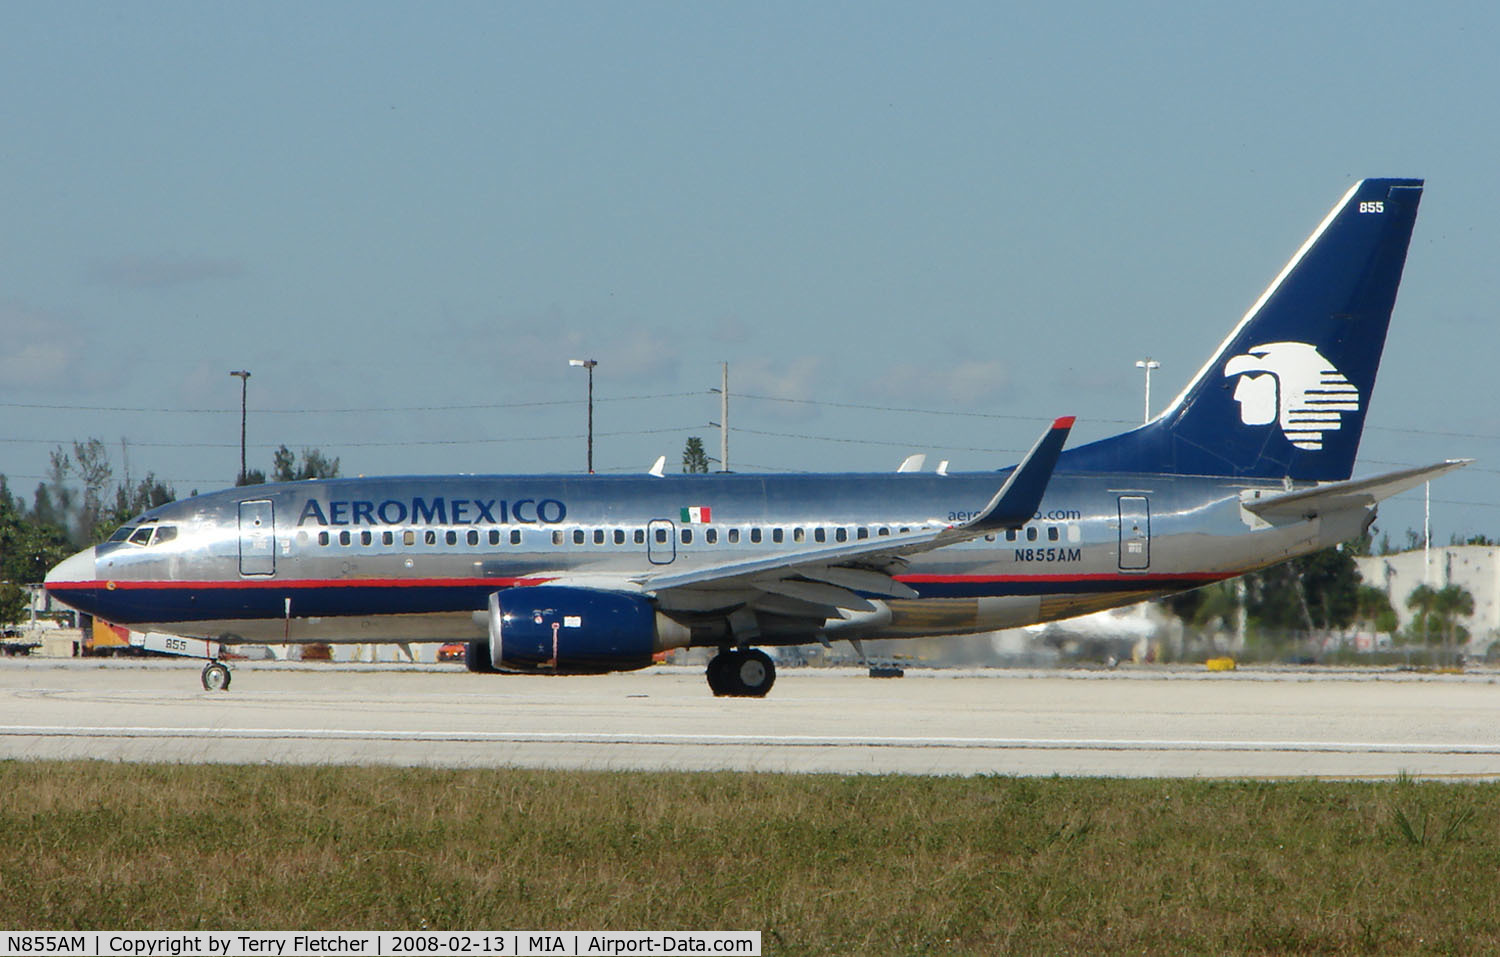 N855AM, 2004 Boeing 737-752 C/N 33792, After its delivery in 2004 this Aeromexico B737 originally flew as XA-KAM